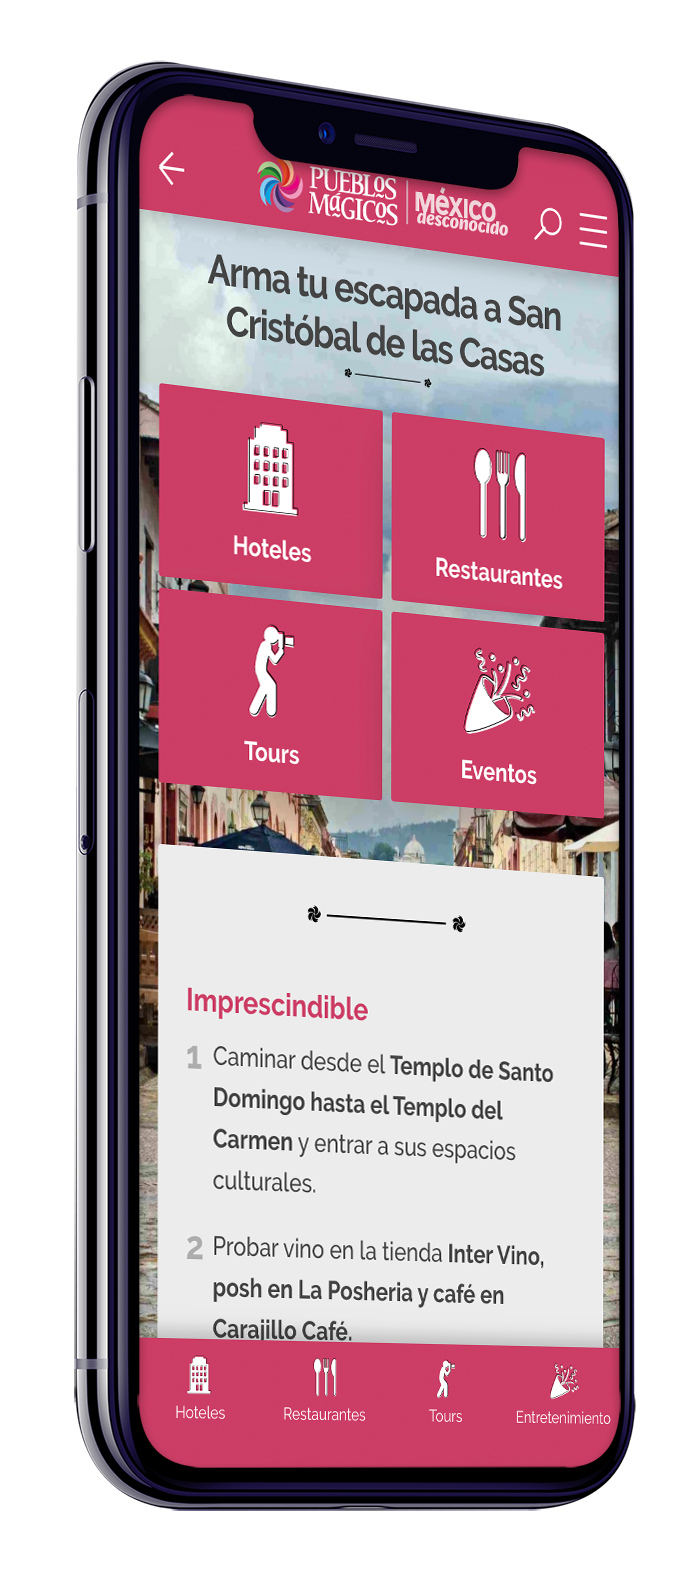 The most important thing is that you browse it and leave us your comments. Here we leave you the link: pueblosmagicosmexico.mx This WebApp was made in collaboration with the federal Ministry of Tourism.